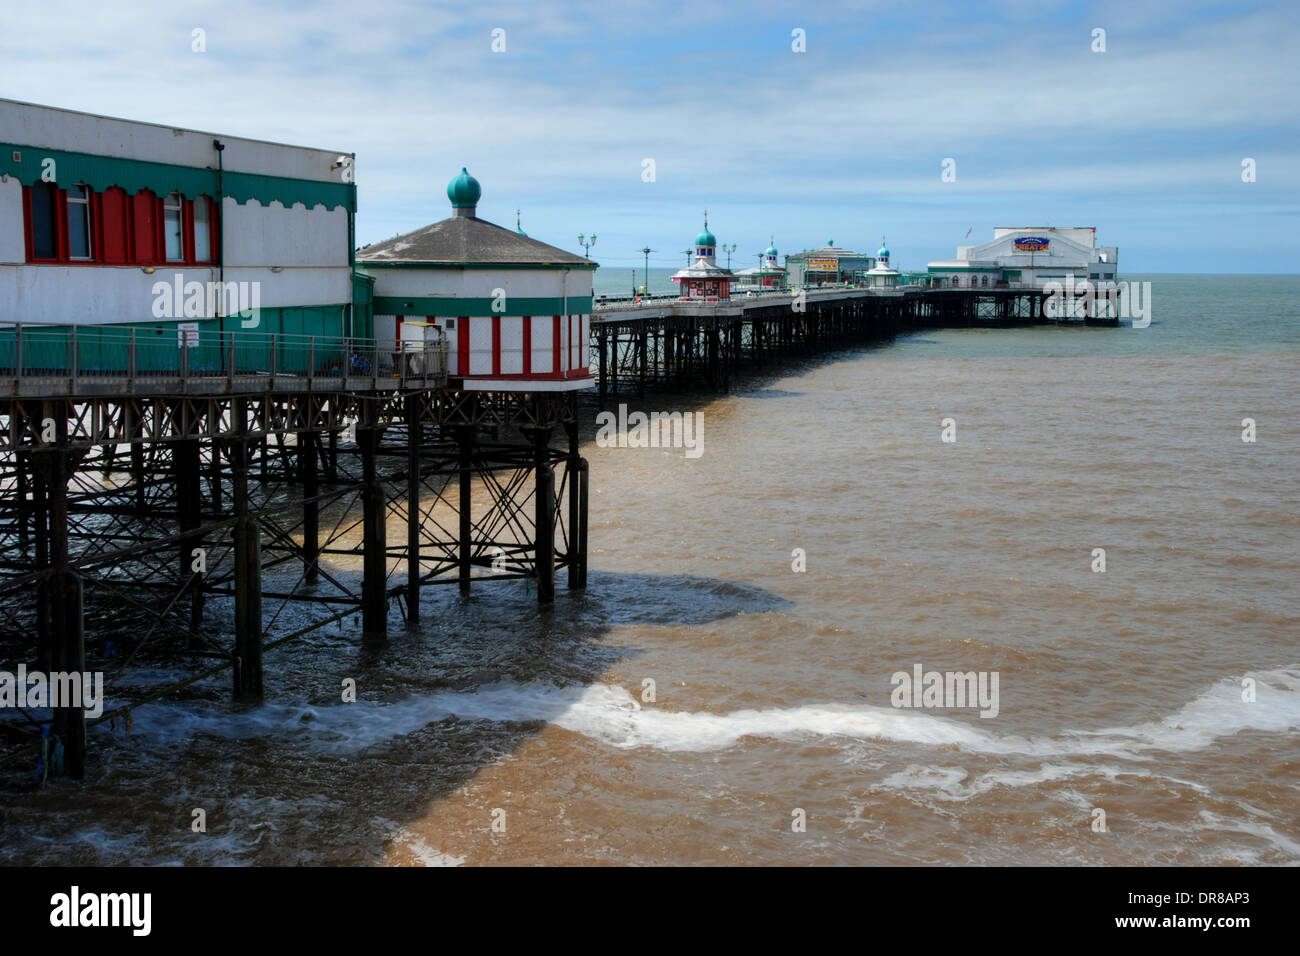 North Pier in Blackpool, England Stock Photo